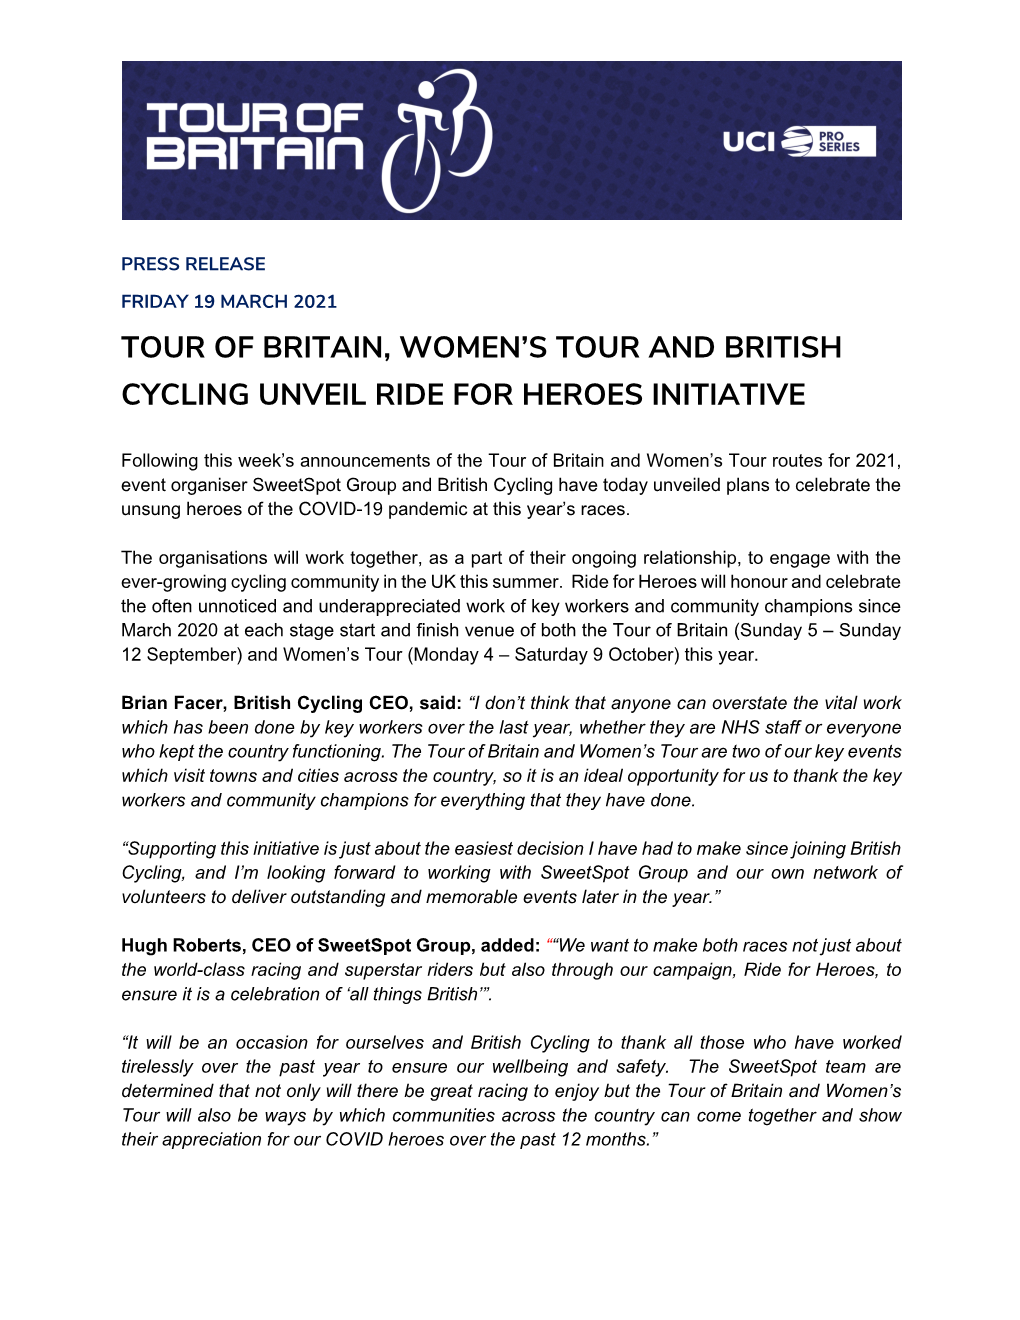 Tour of Britain, Women's Tour and British Cycling Unveil